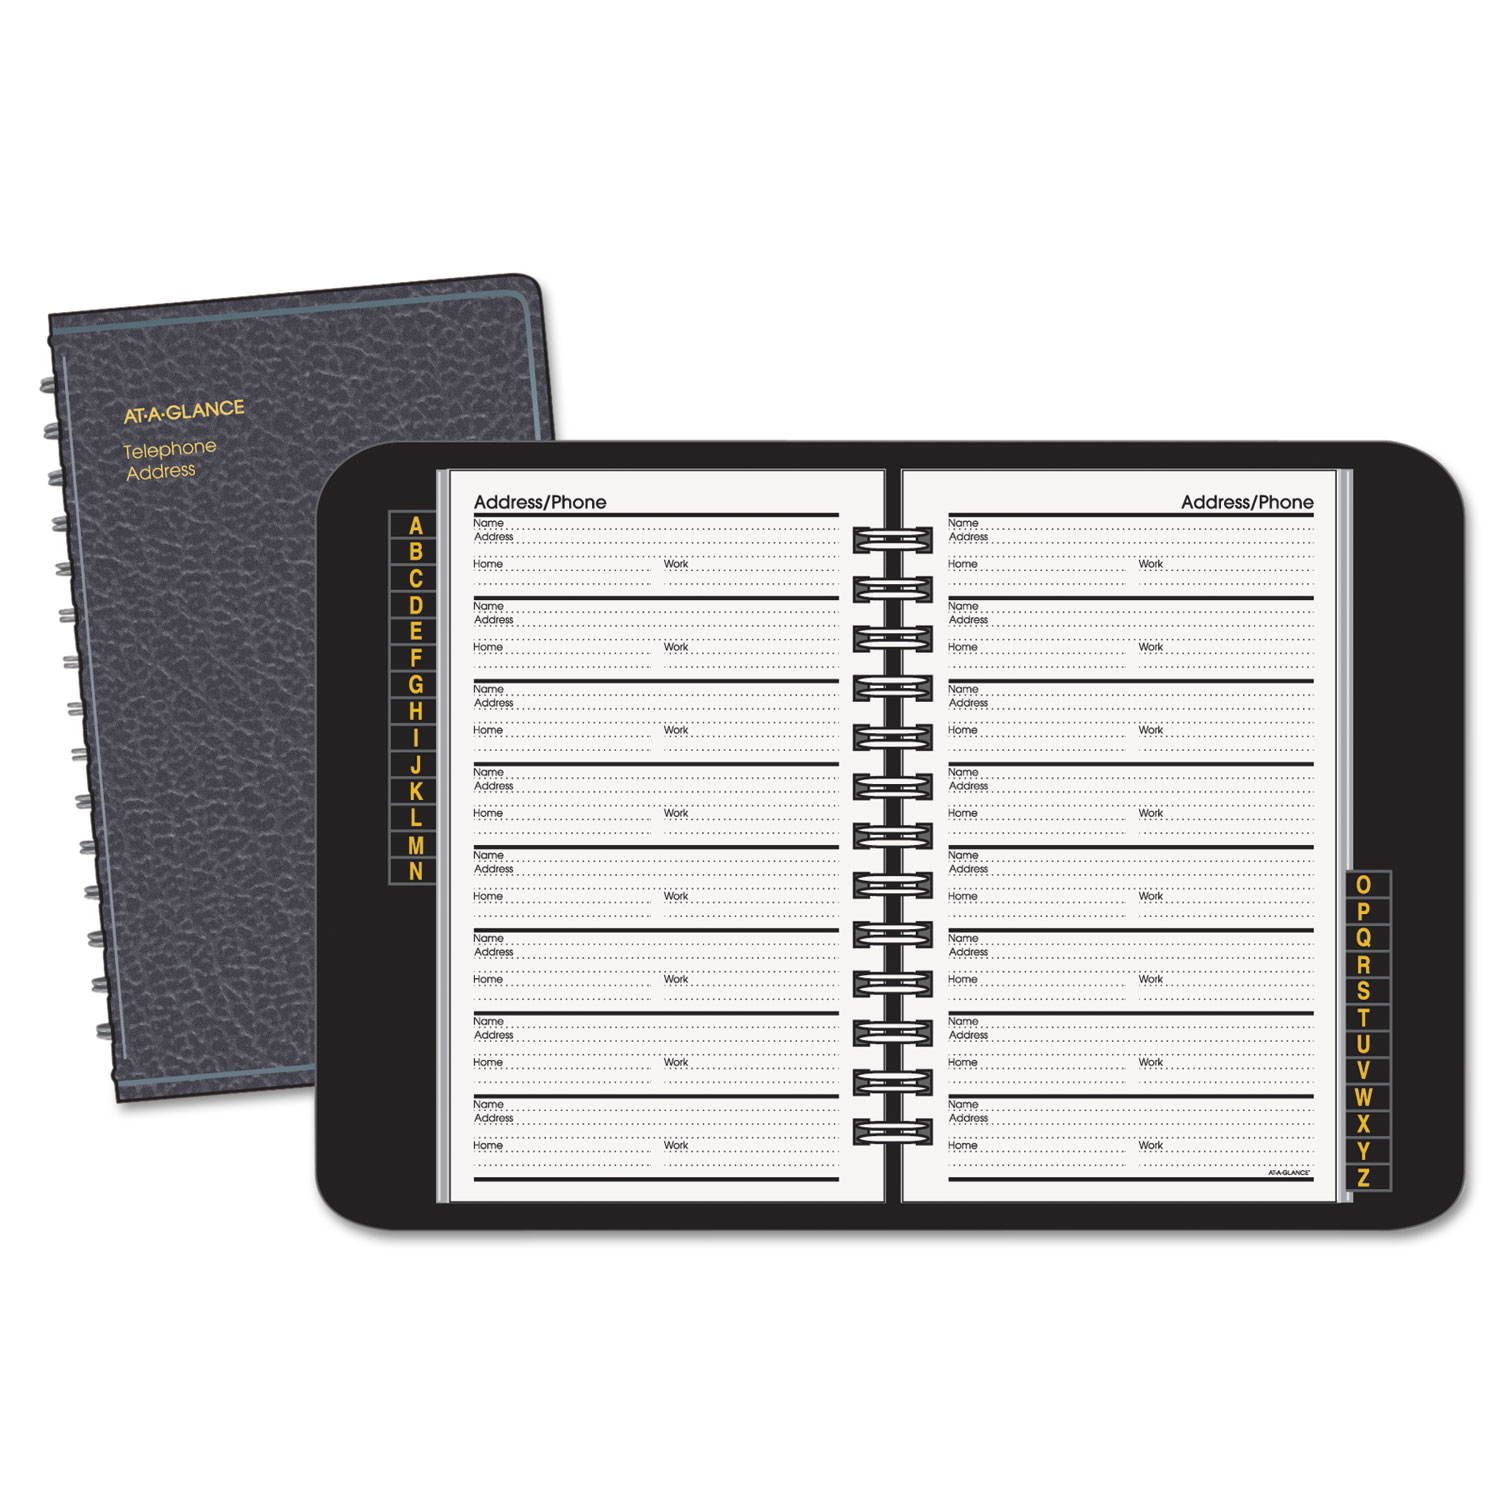 800+ Entries 4-7/8 x 8 Page Size Black 8001105 AT-A-GLANCE Large Telephone & Address Book 